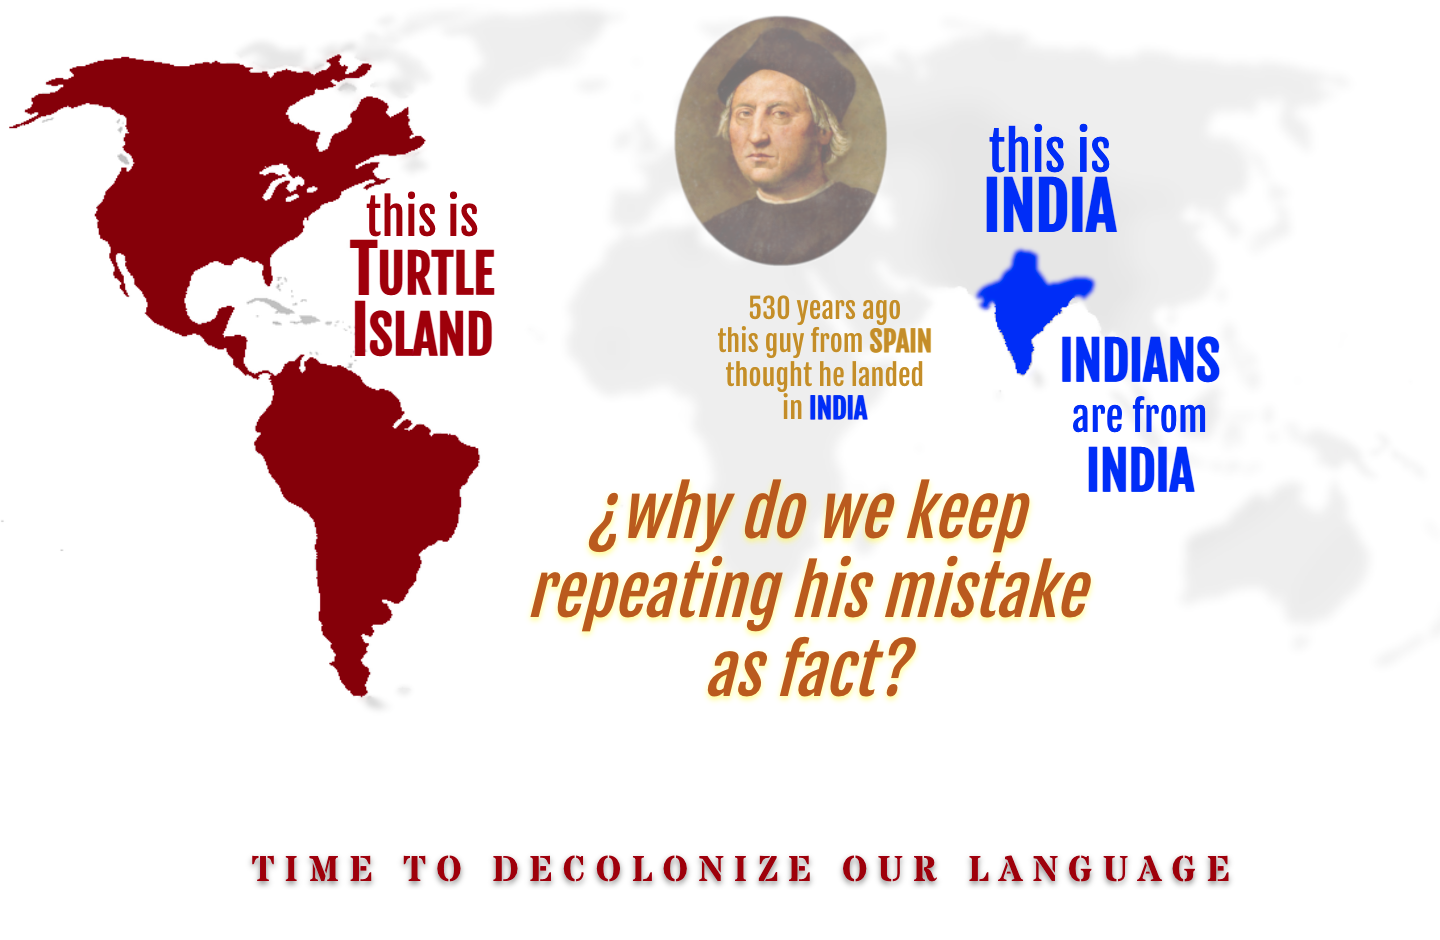 Indians are from India. Time to decolonize our linguistic mistakes